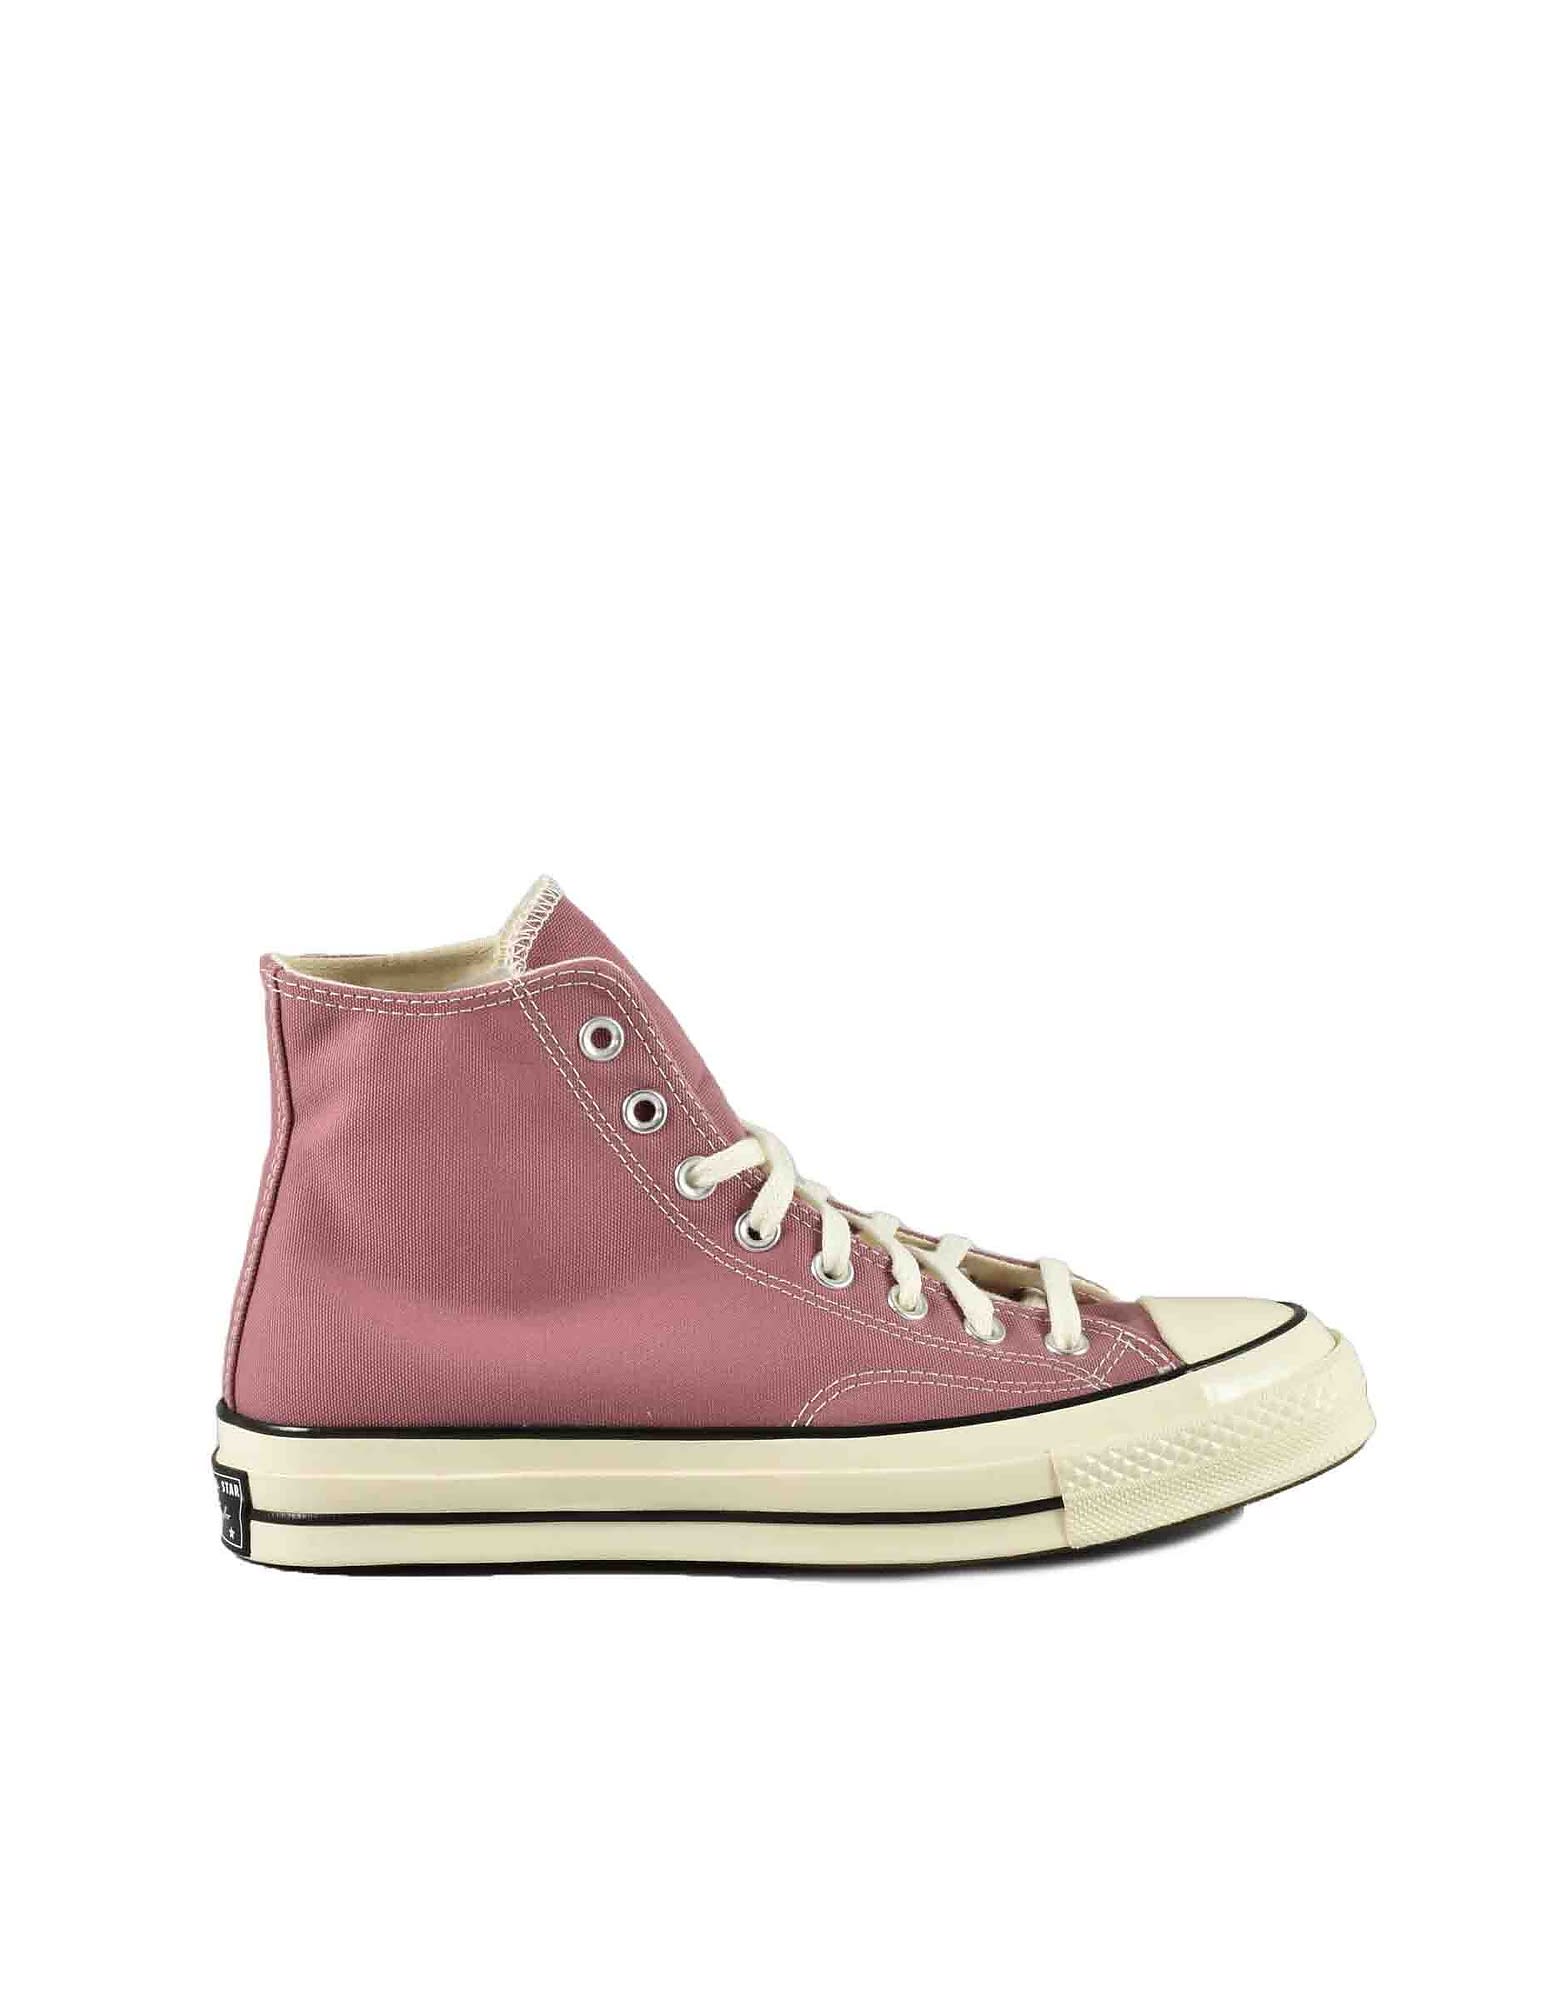 CONVERSE MENS ANTIQUE PINK SNEAKERS